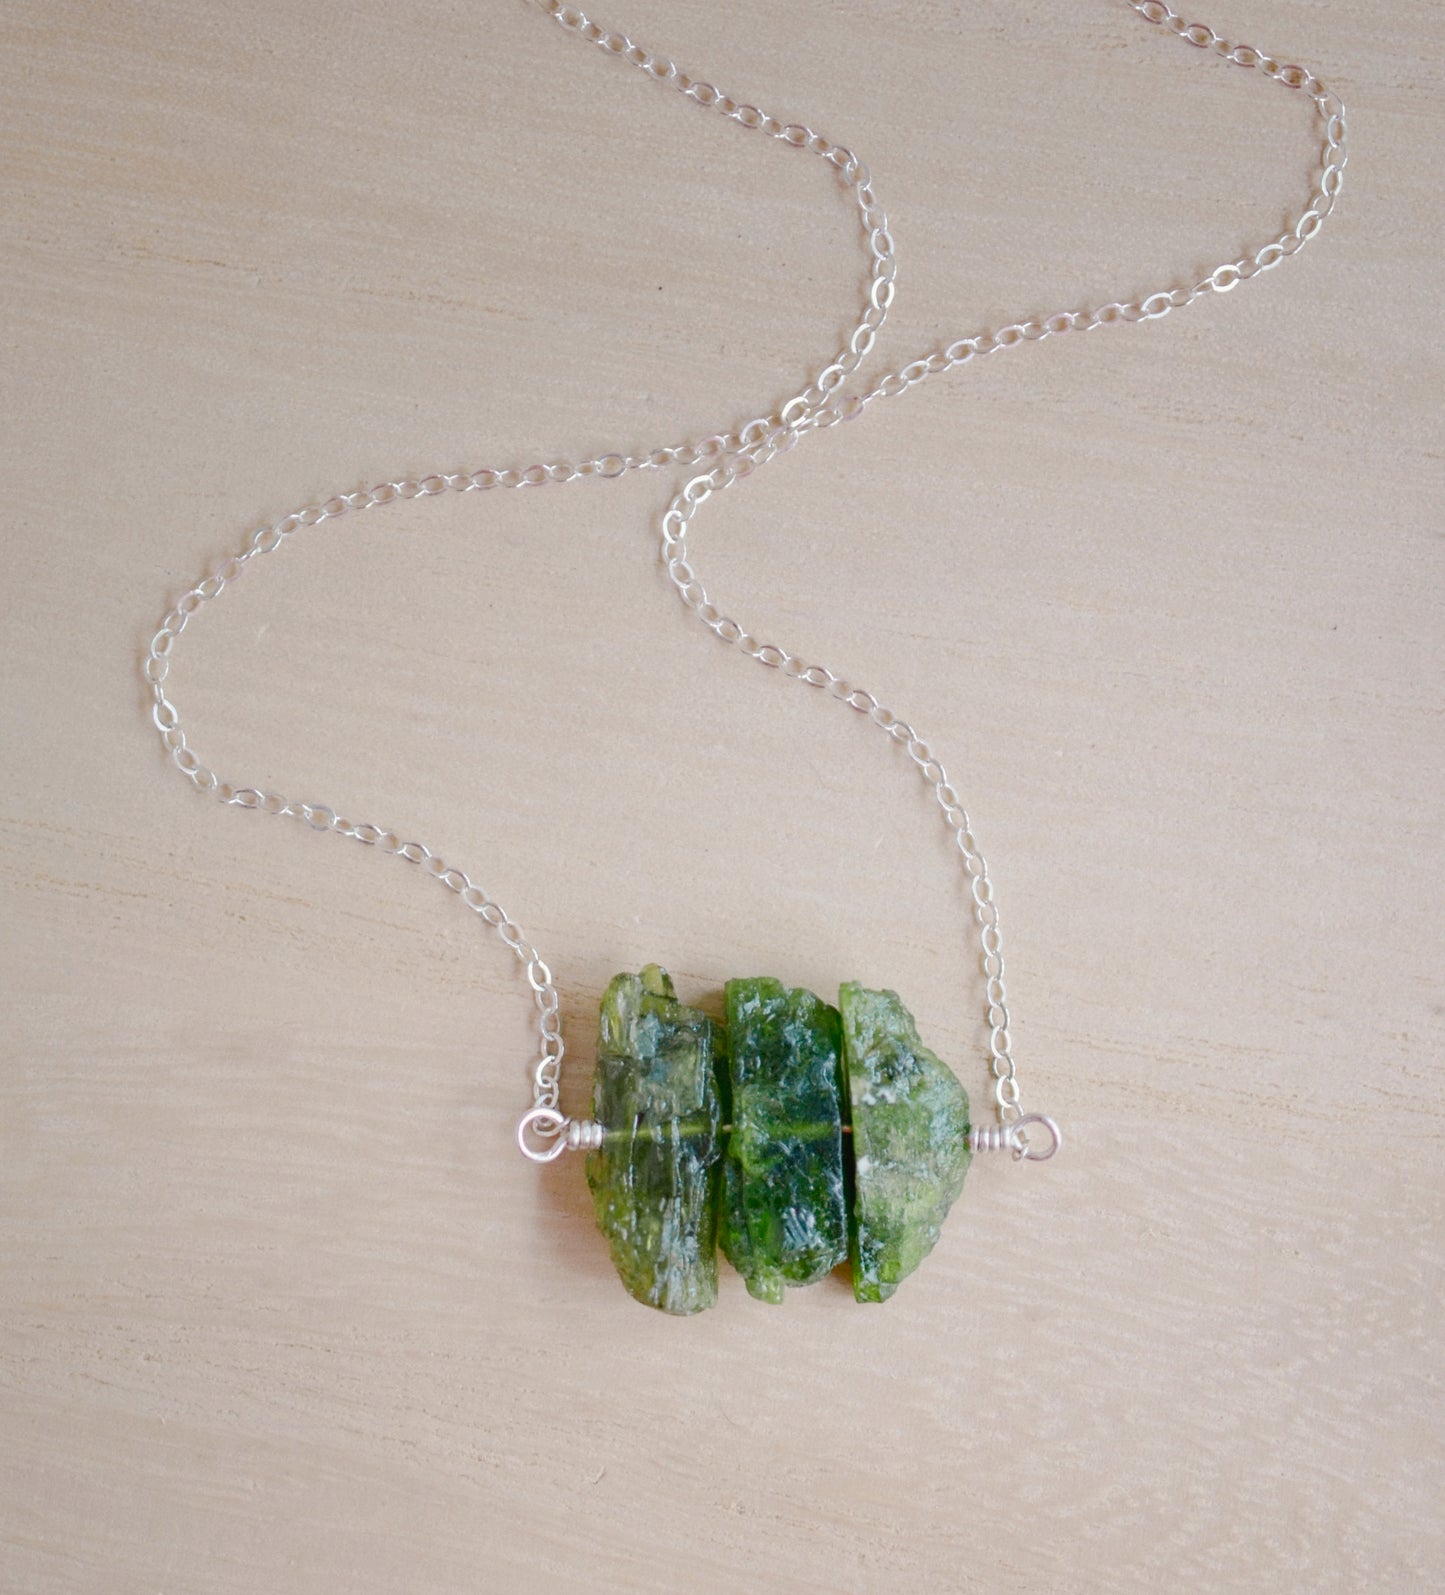 Natural green Chrome Diopside raw crystals set onto a sterling silver chain.